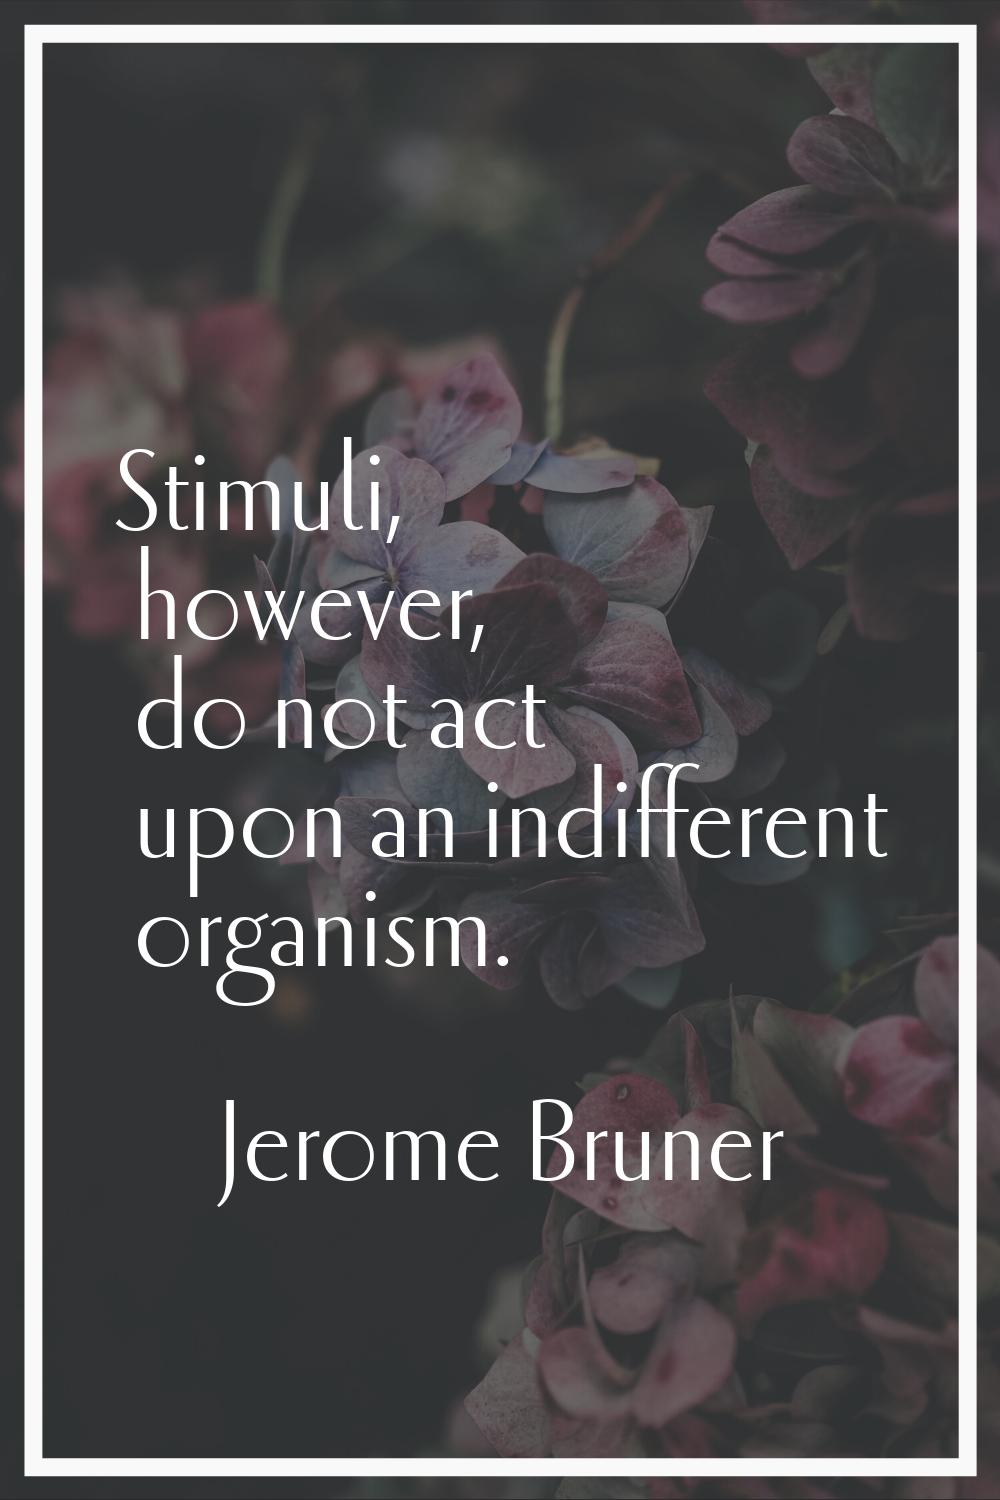 Stimuli, however, do not act upon an indifferent organism.